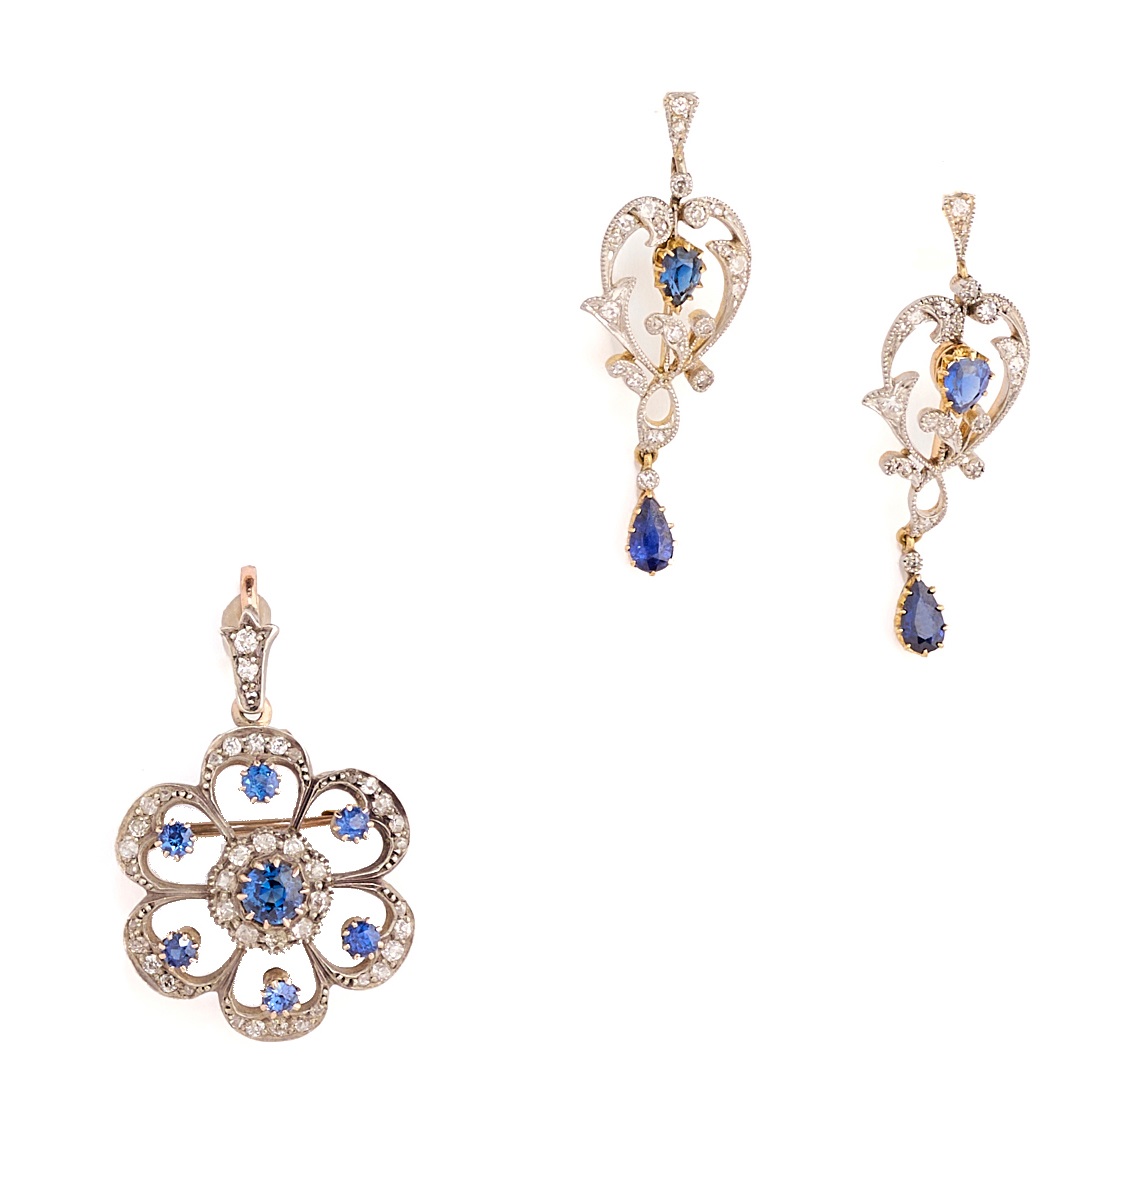 SAPPHIRE AND DIAMOND PENDANT/BROOCH AND PAIR OF EAR PENDANTS, 1900s